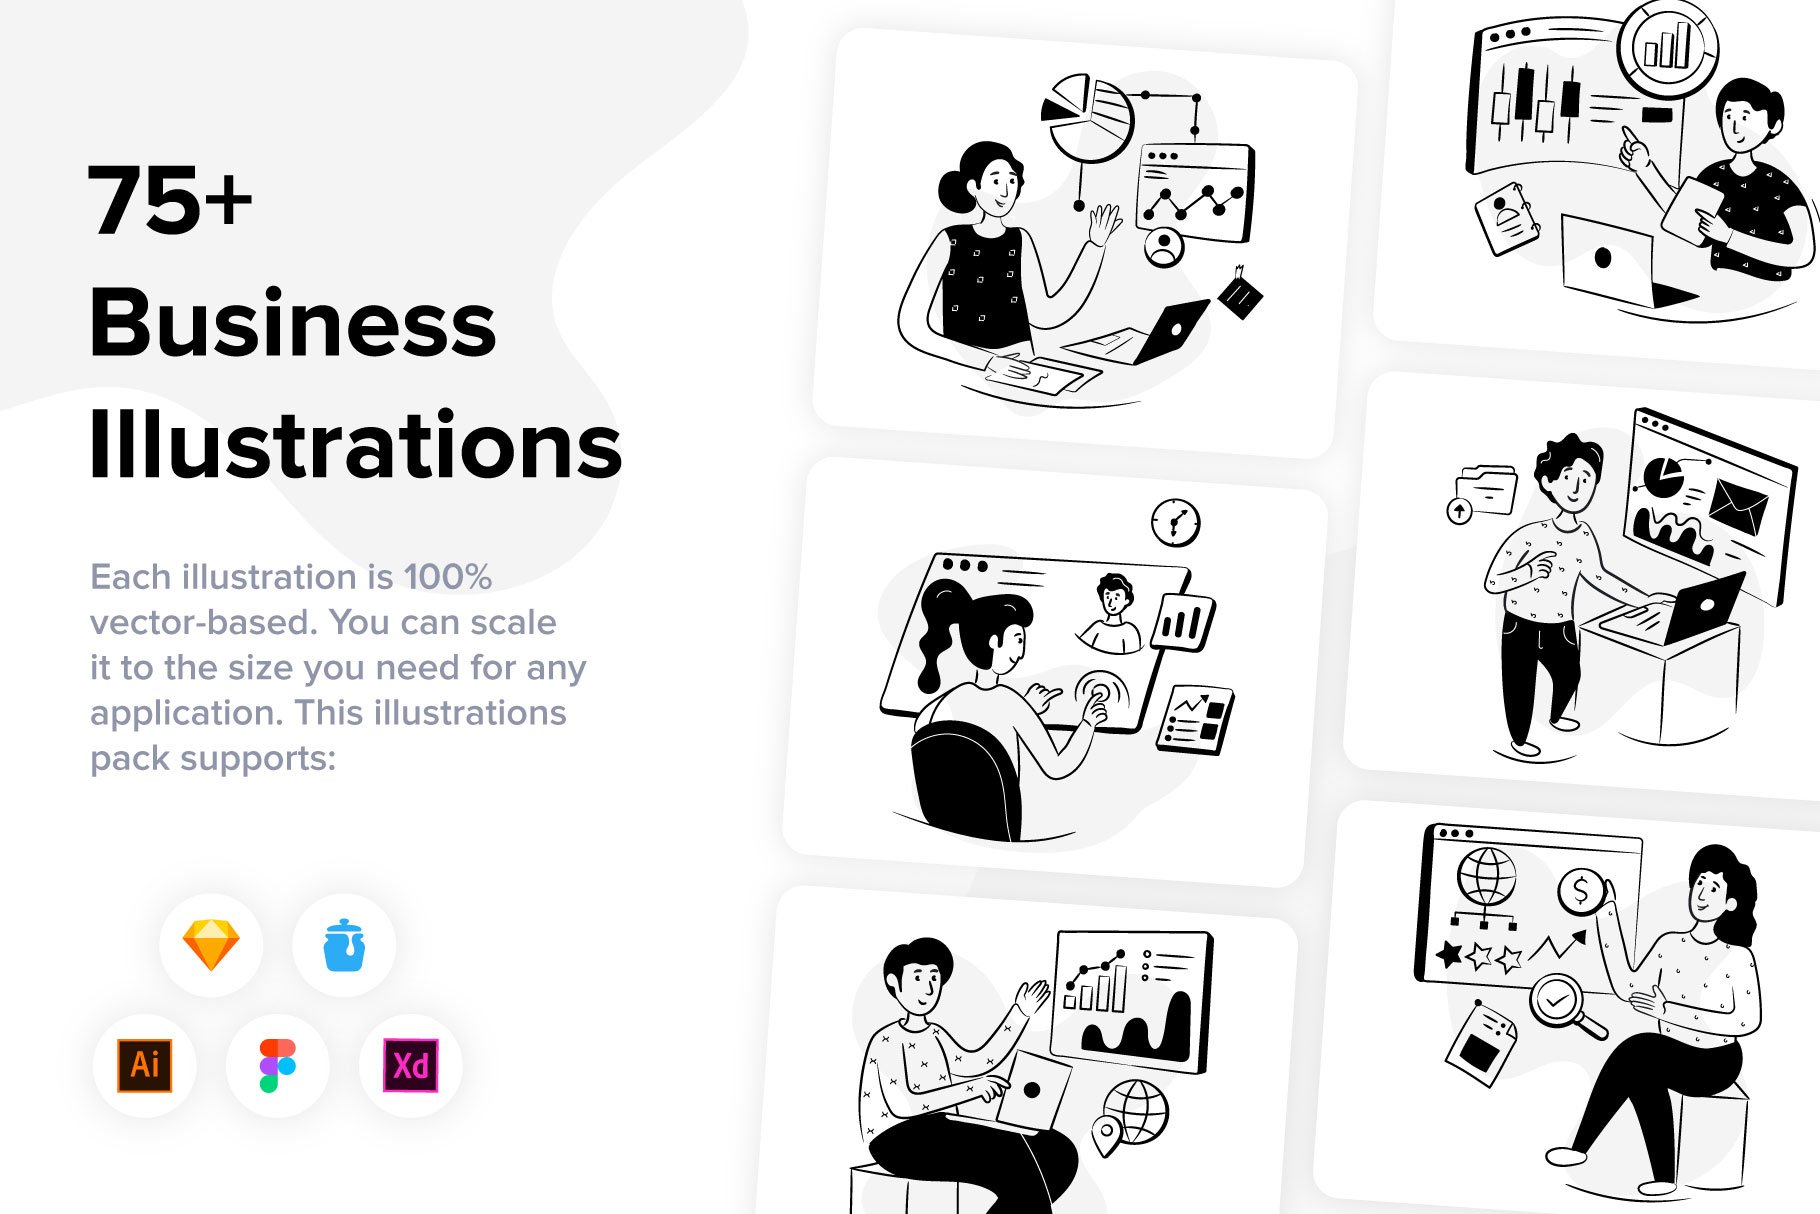 79 Hand Drawn Business Illustrations cover image.